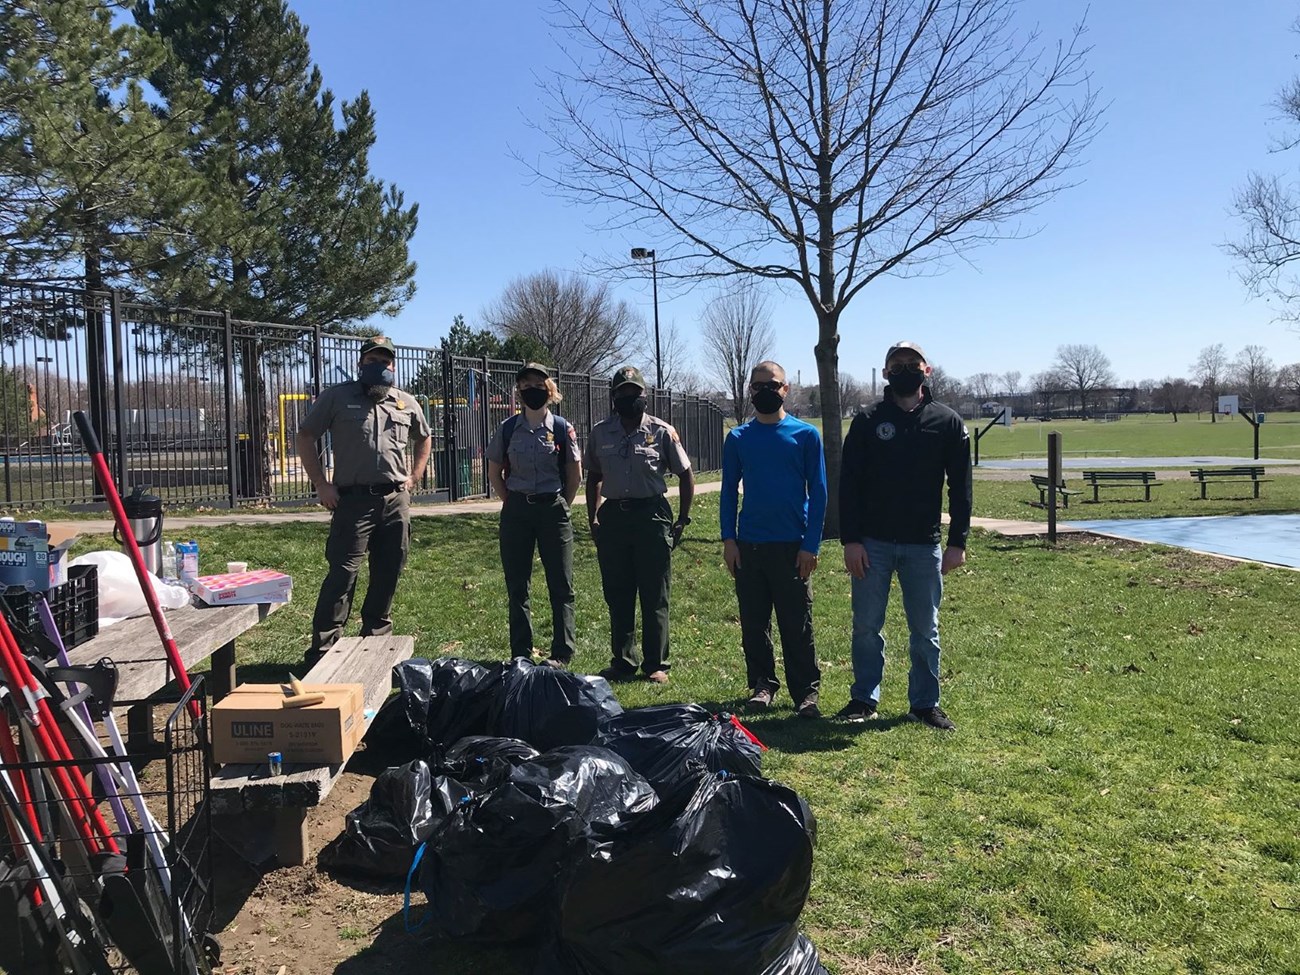 Three Rangers, the Coltsville Community Volunteer Ambassador, and a volunteer stand together looking at the camera. In front of them is a pile of full trashbags and tools for picking up trash. They are in a green field in Colt Park, Hartford, CT.